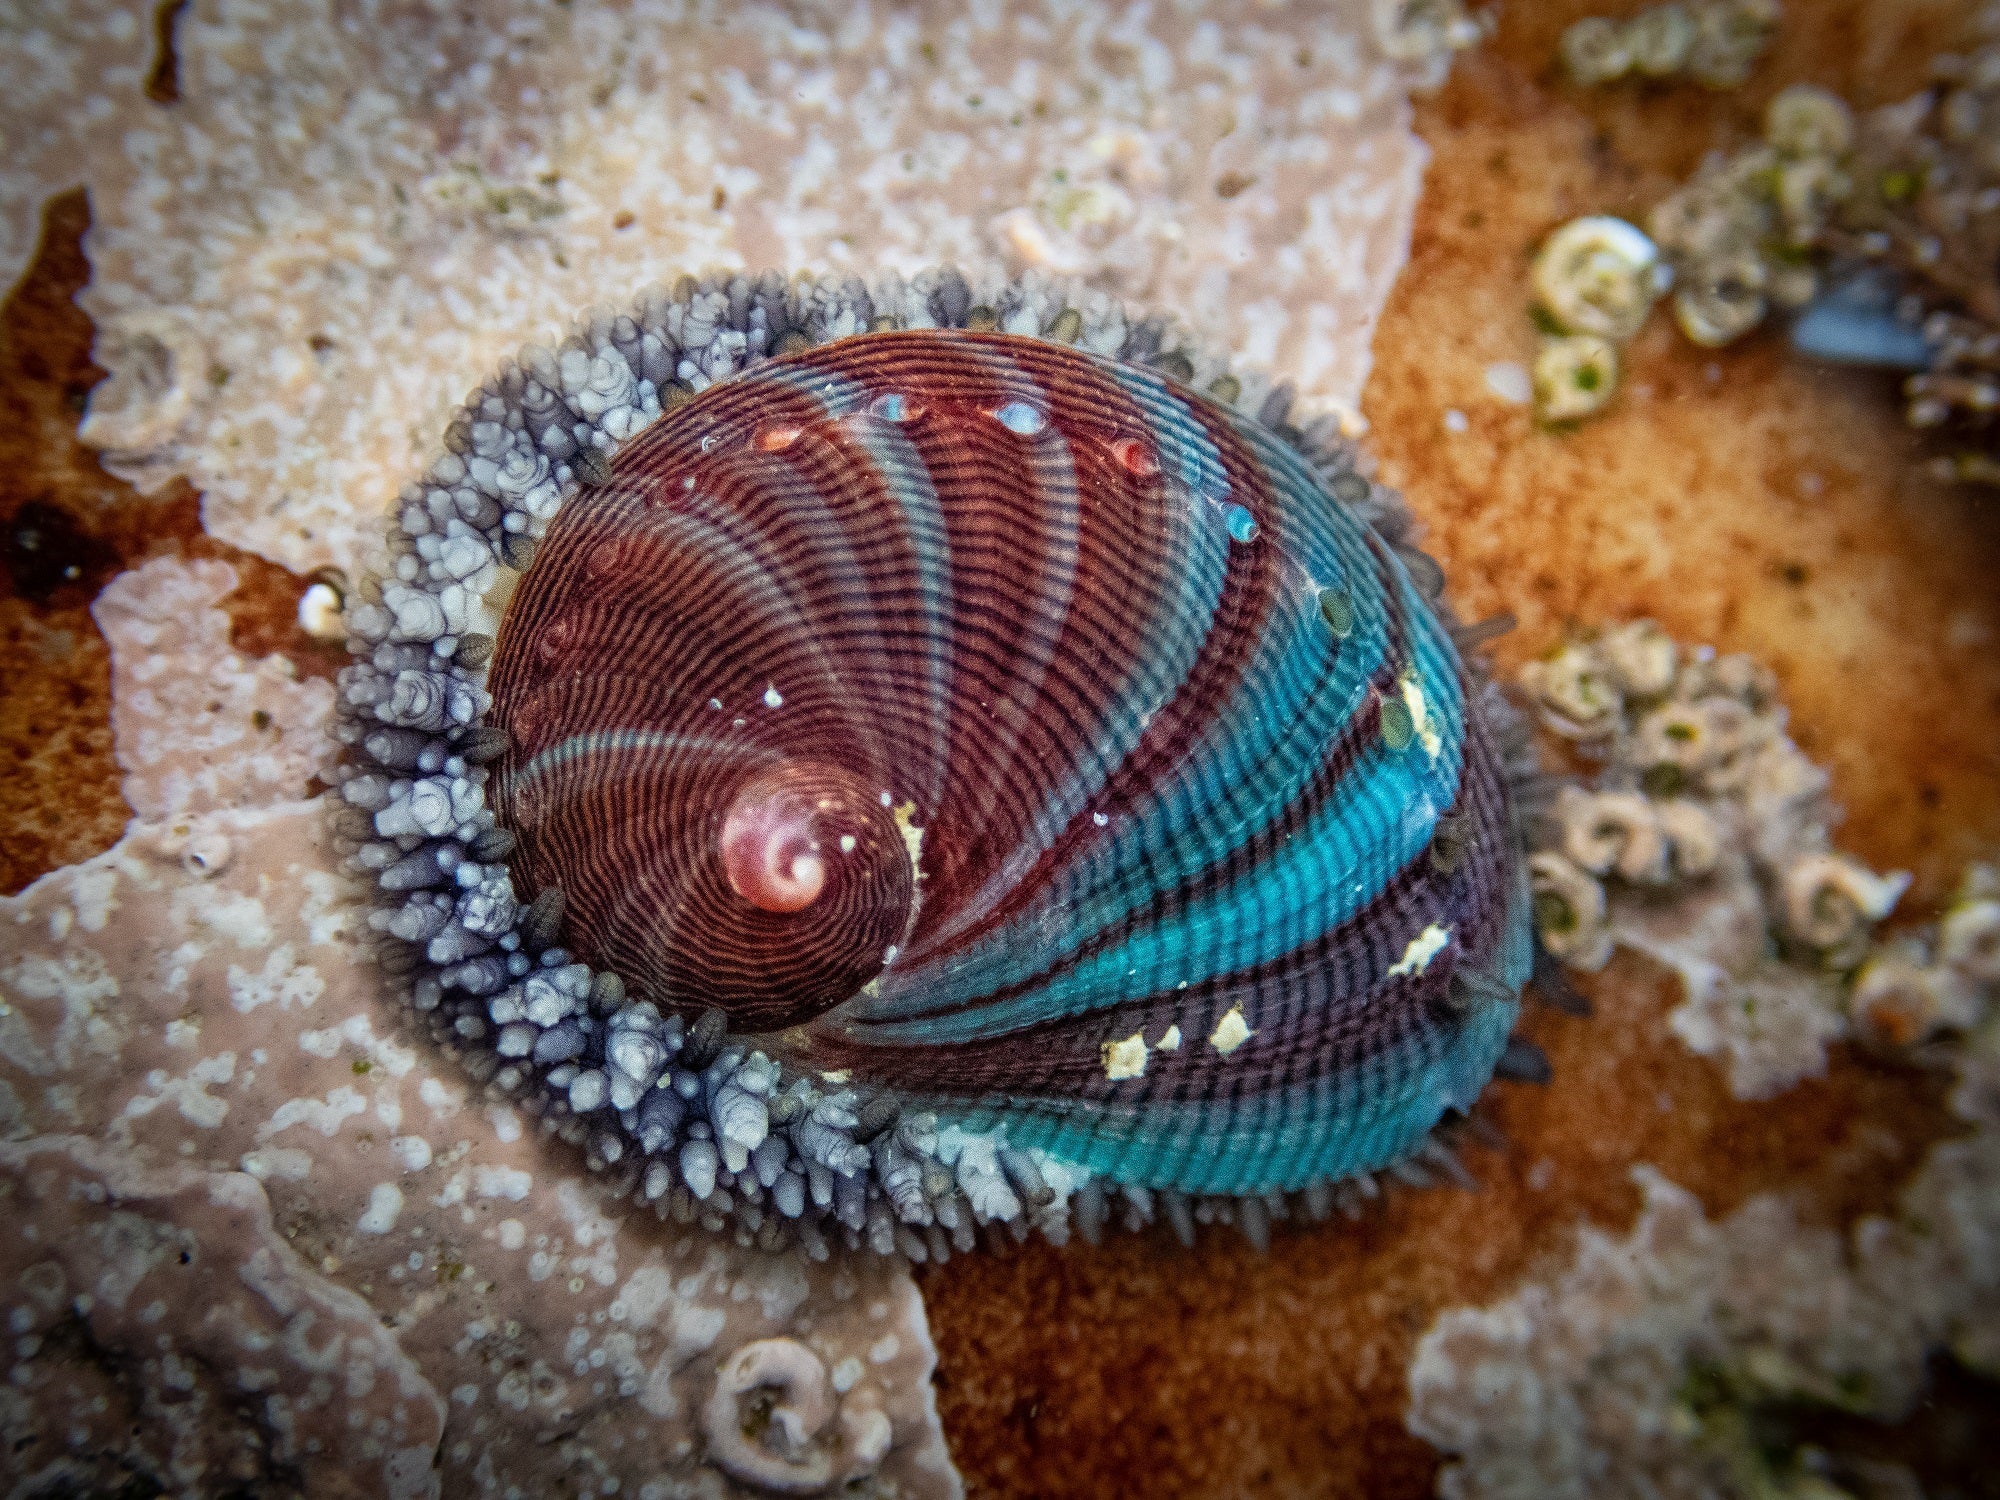 It is possible to track what a young abalone has eaten by looking at the color pattern on its shell.